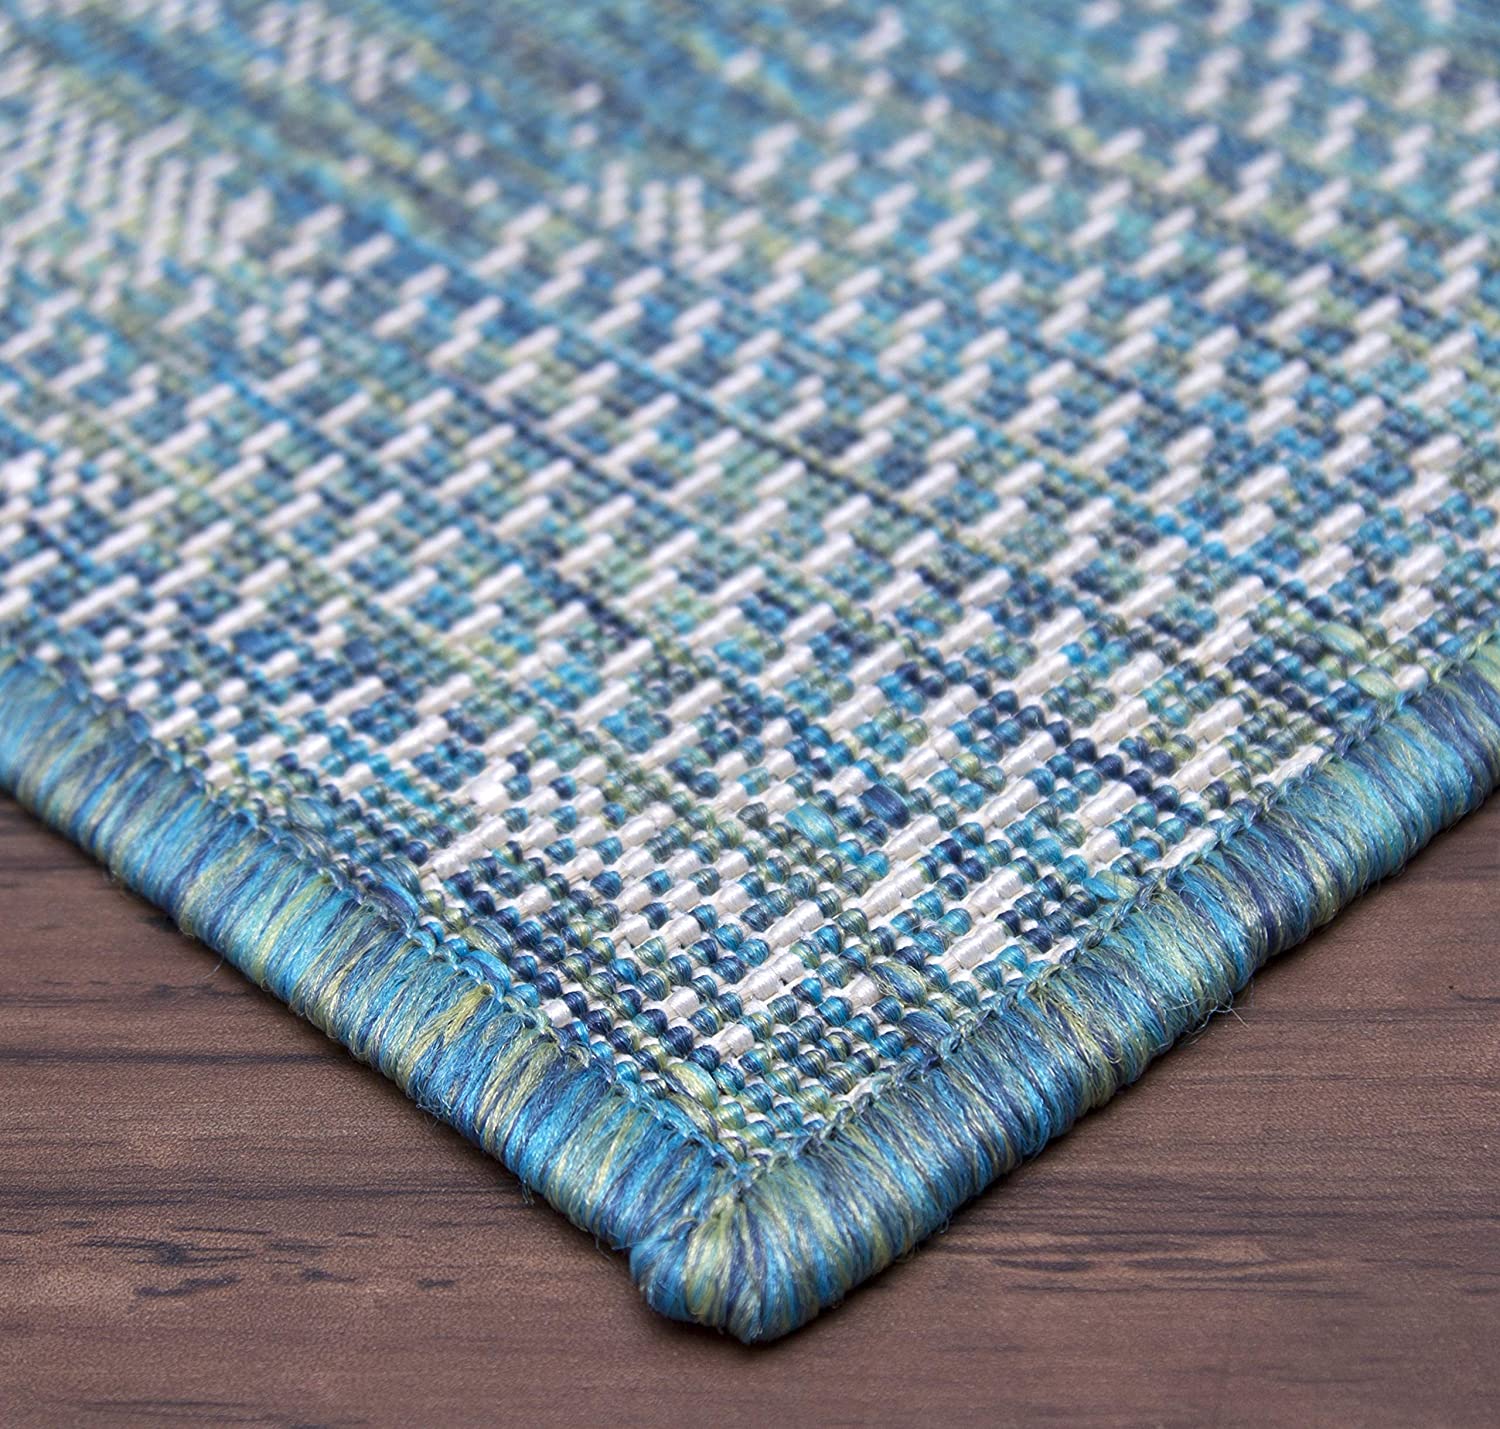 Abstract Vintage Rug - 5 ft. 3 in. x 7 ft. 6 in., Ocean, Indoor/Outdoor Area Rug with Distressed Pattern, Stain Resistant, Washable Rug | Stylish Area Rugs - image 4 of 8